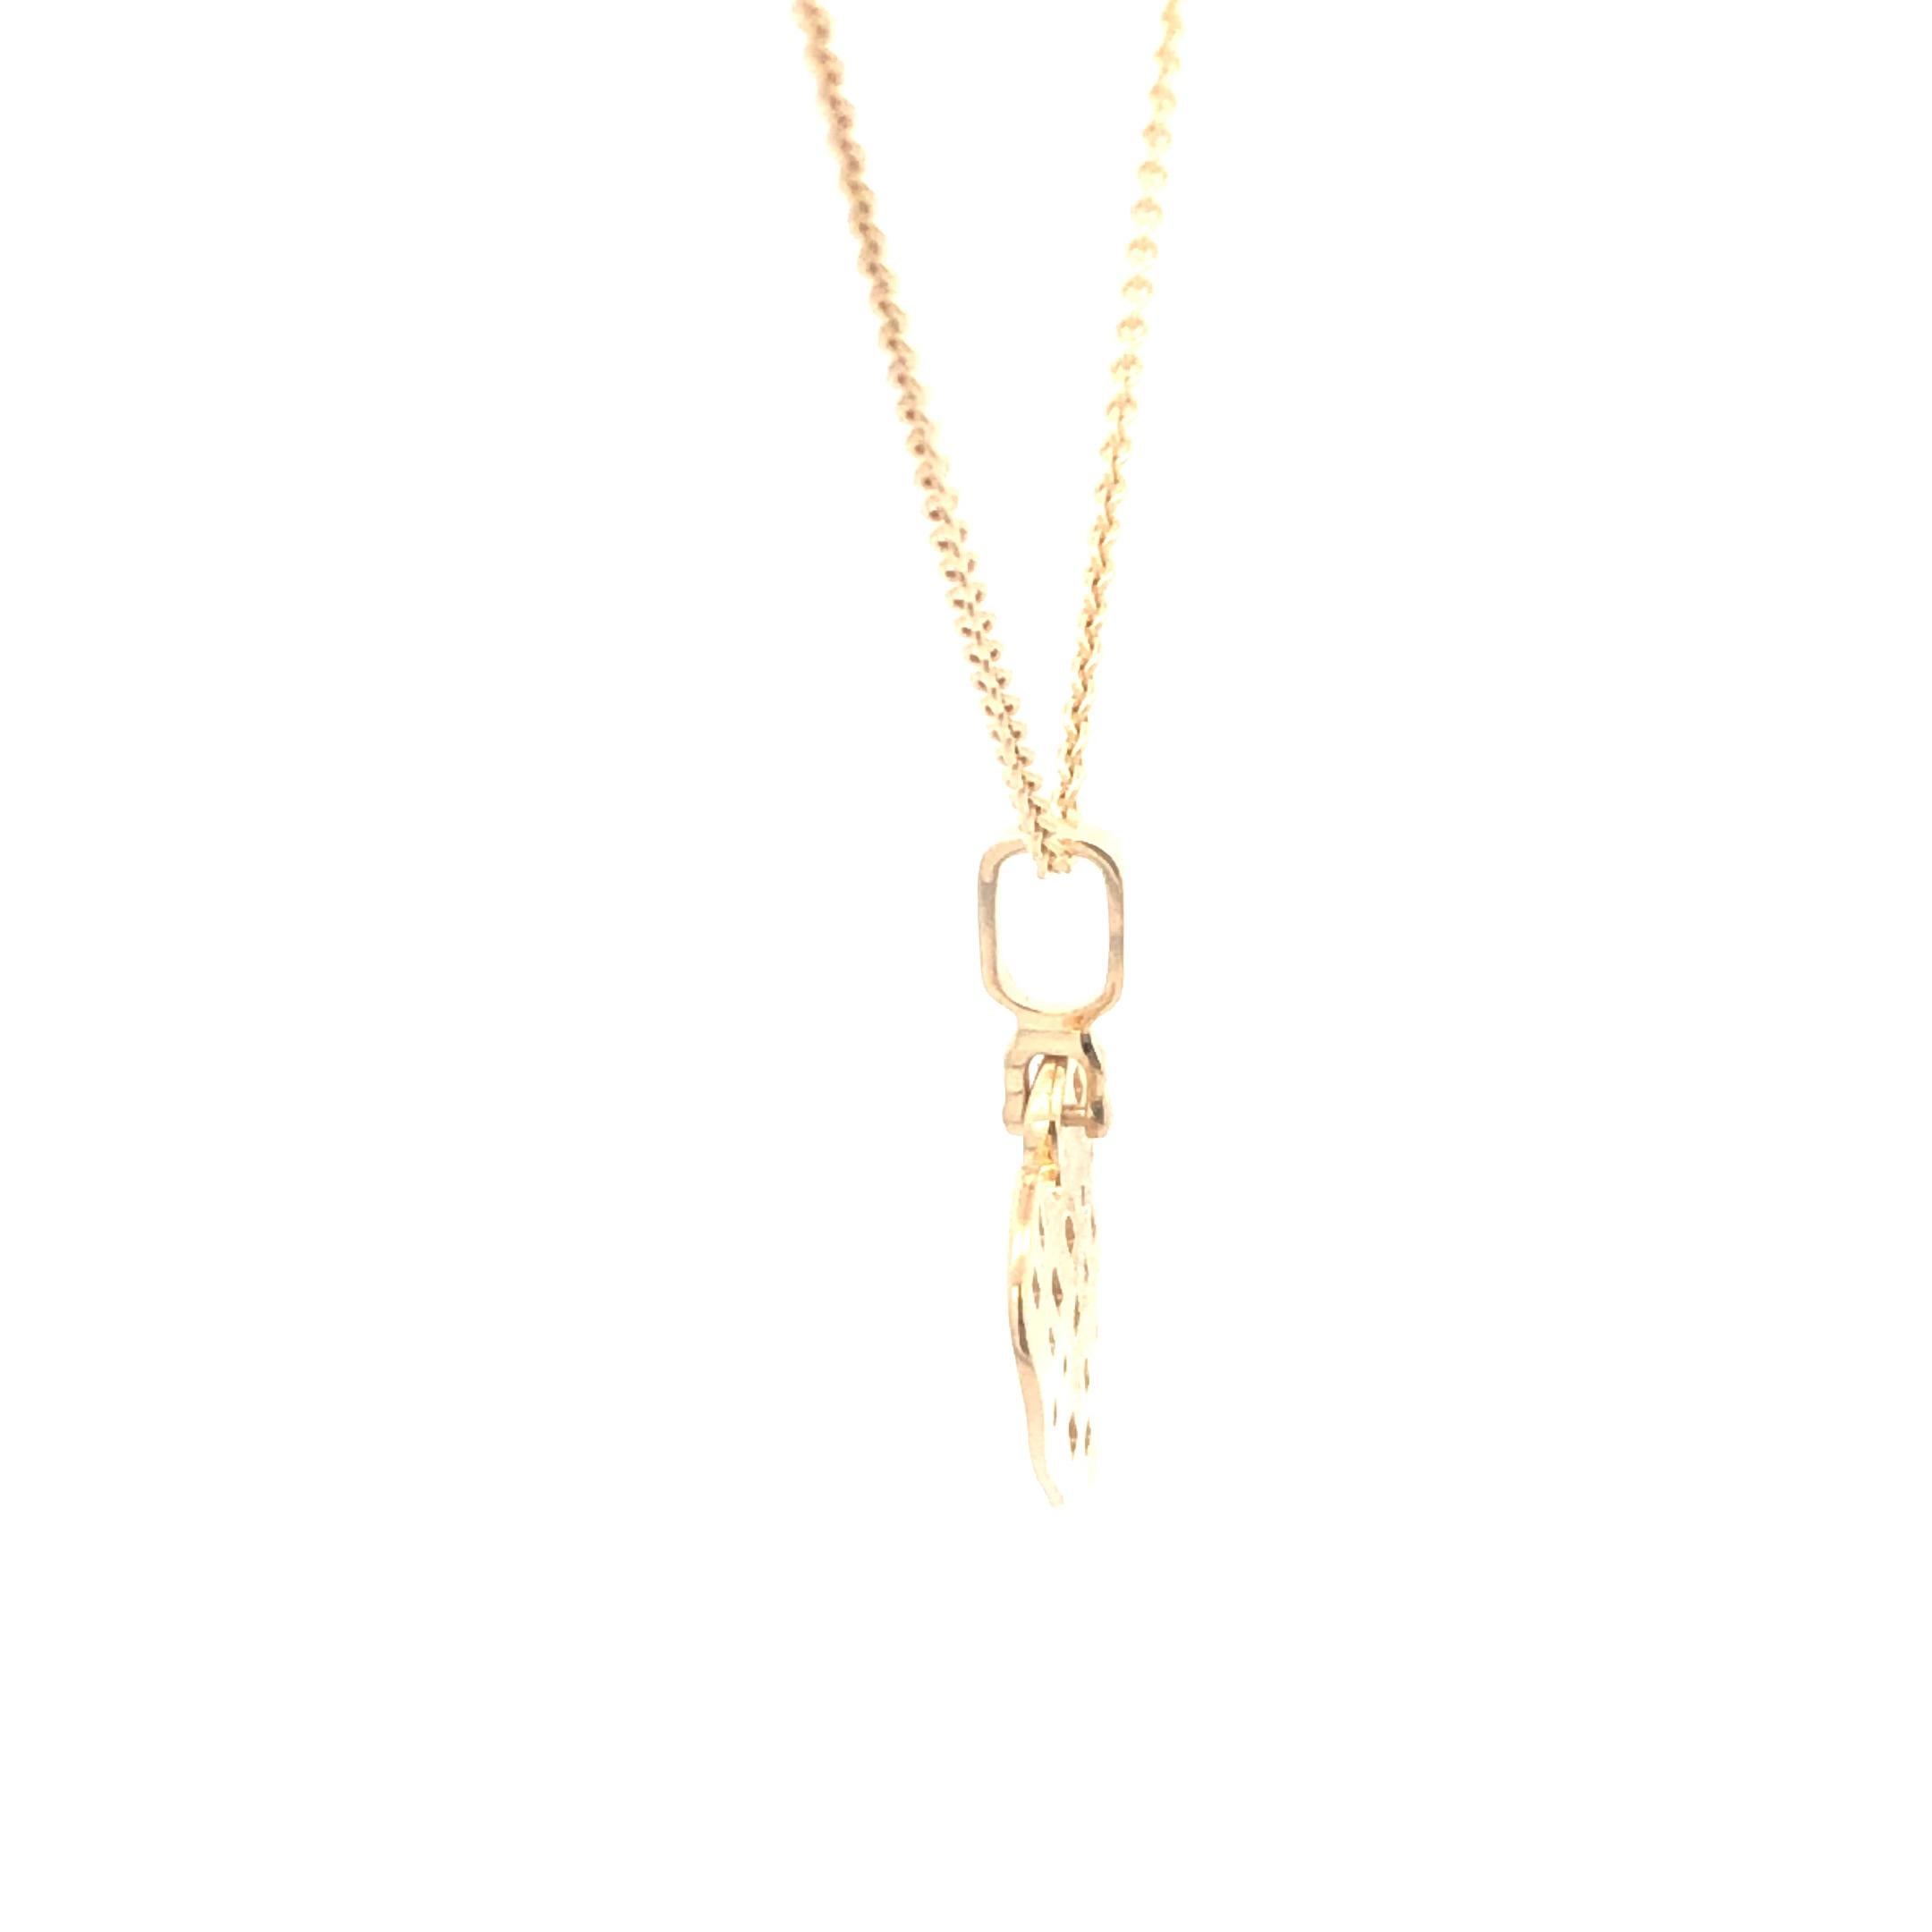 Alex Sepkus 'Heart' Pendant on 18'' Cable Chain 18K Yellow Gold In New Condition For Sale In Dallas, TX